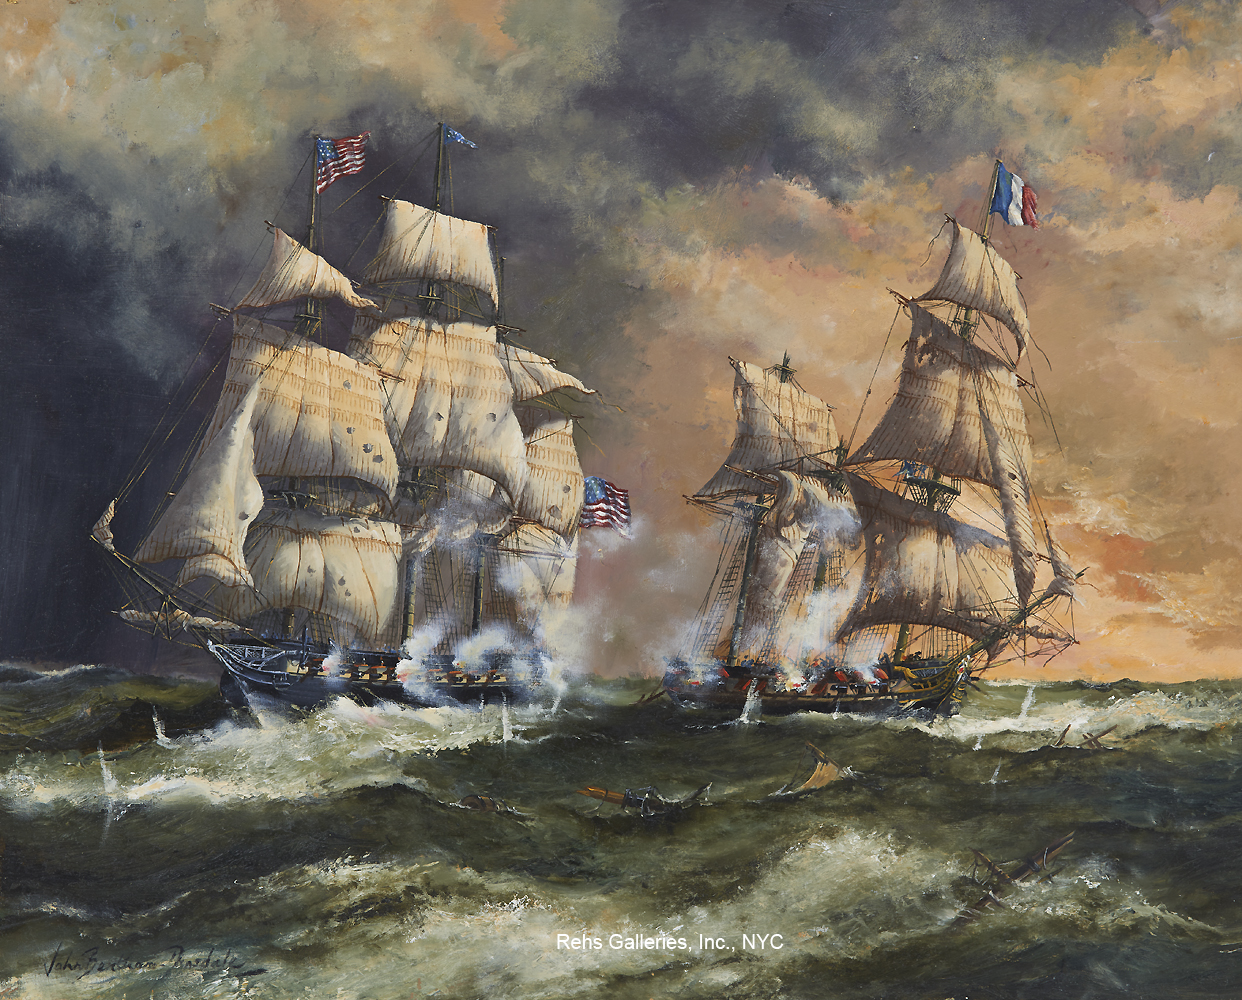 The First Capture, Feb. 9, 1799: USS Constitution & French Insurgence - John Bentham-Dinsdale